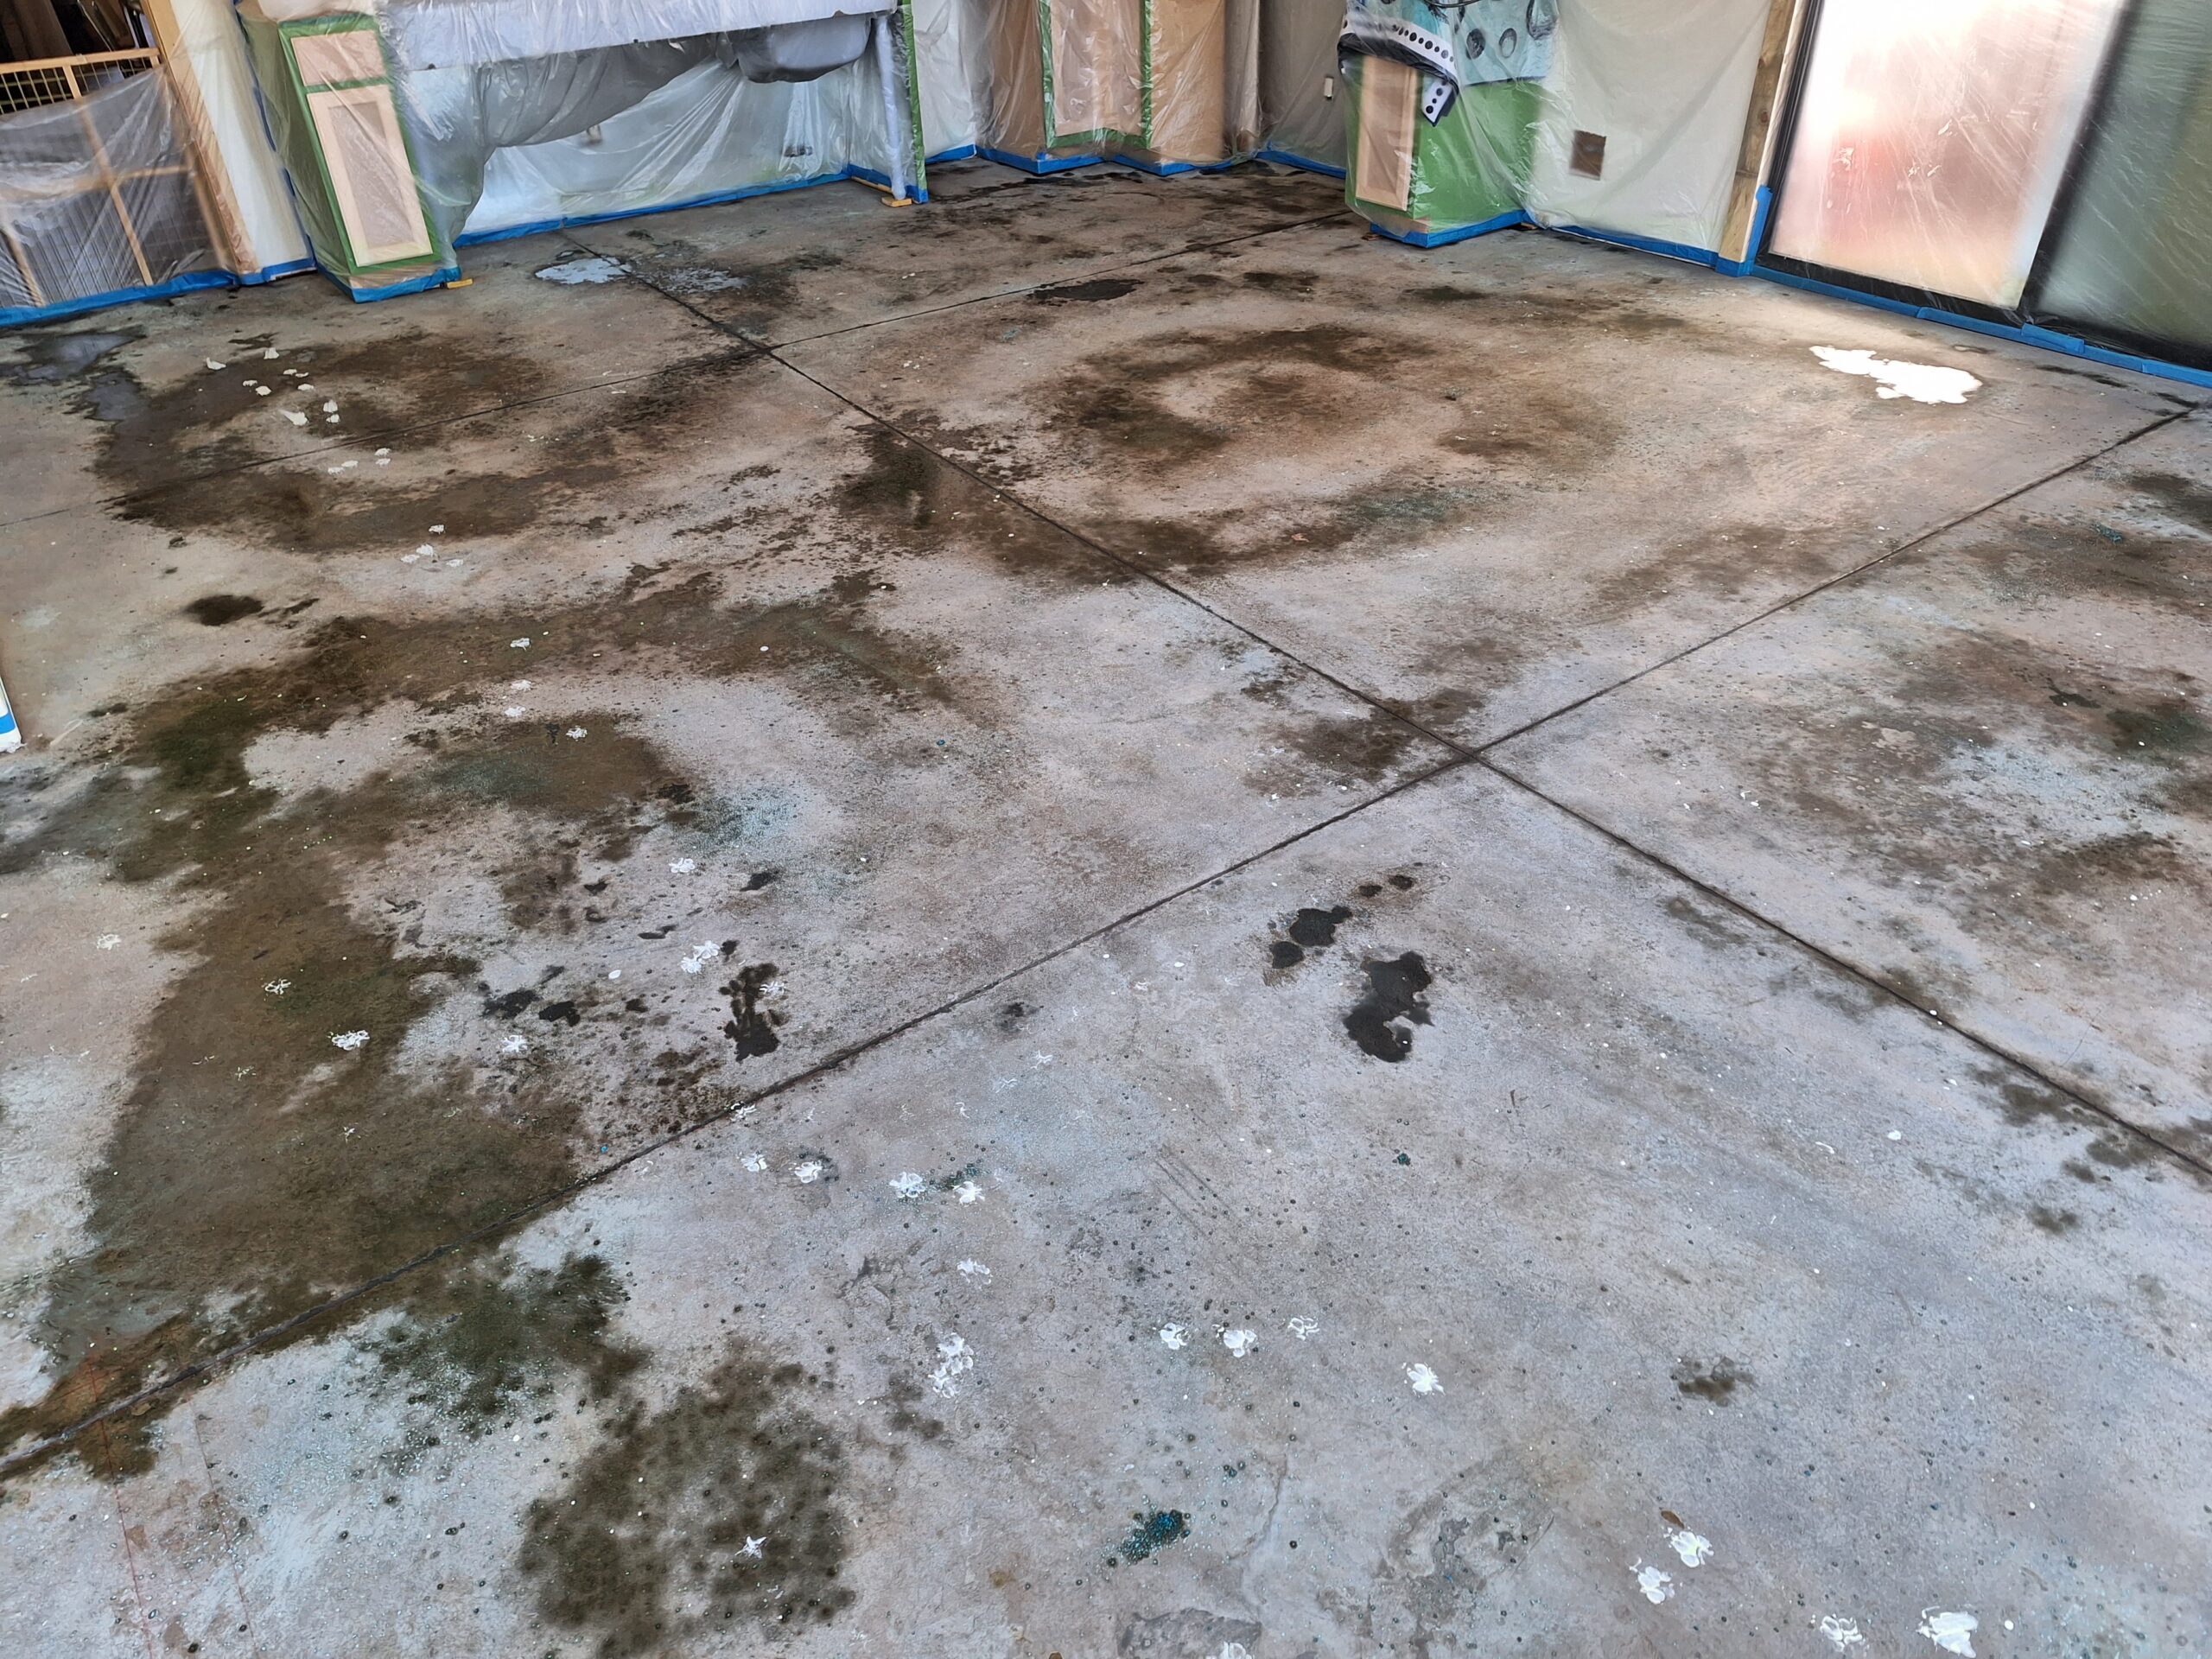 Image of a large metal building interior showing a bare, distressed concrete slab floor.